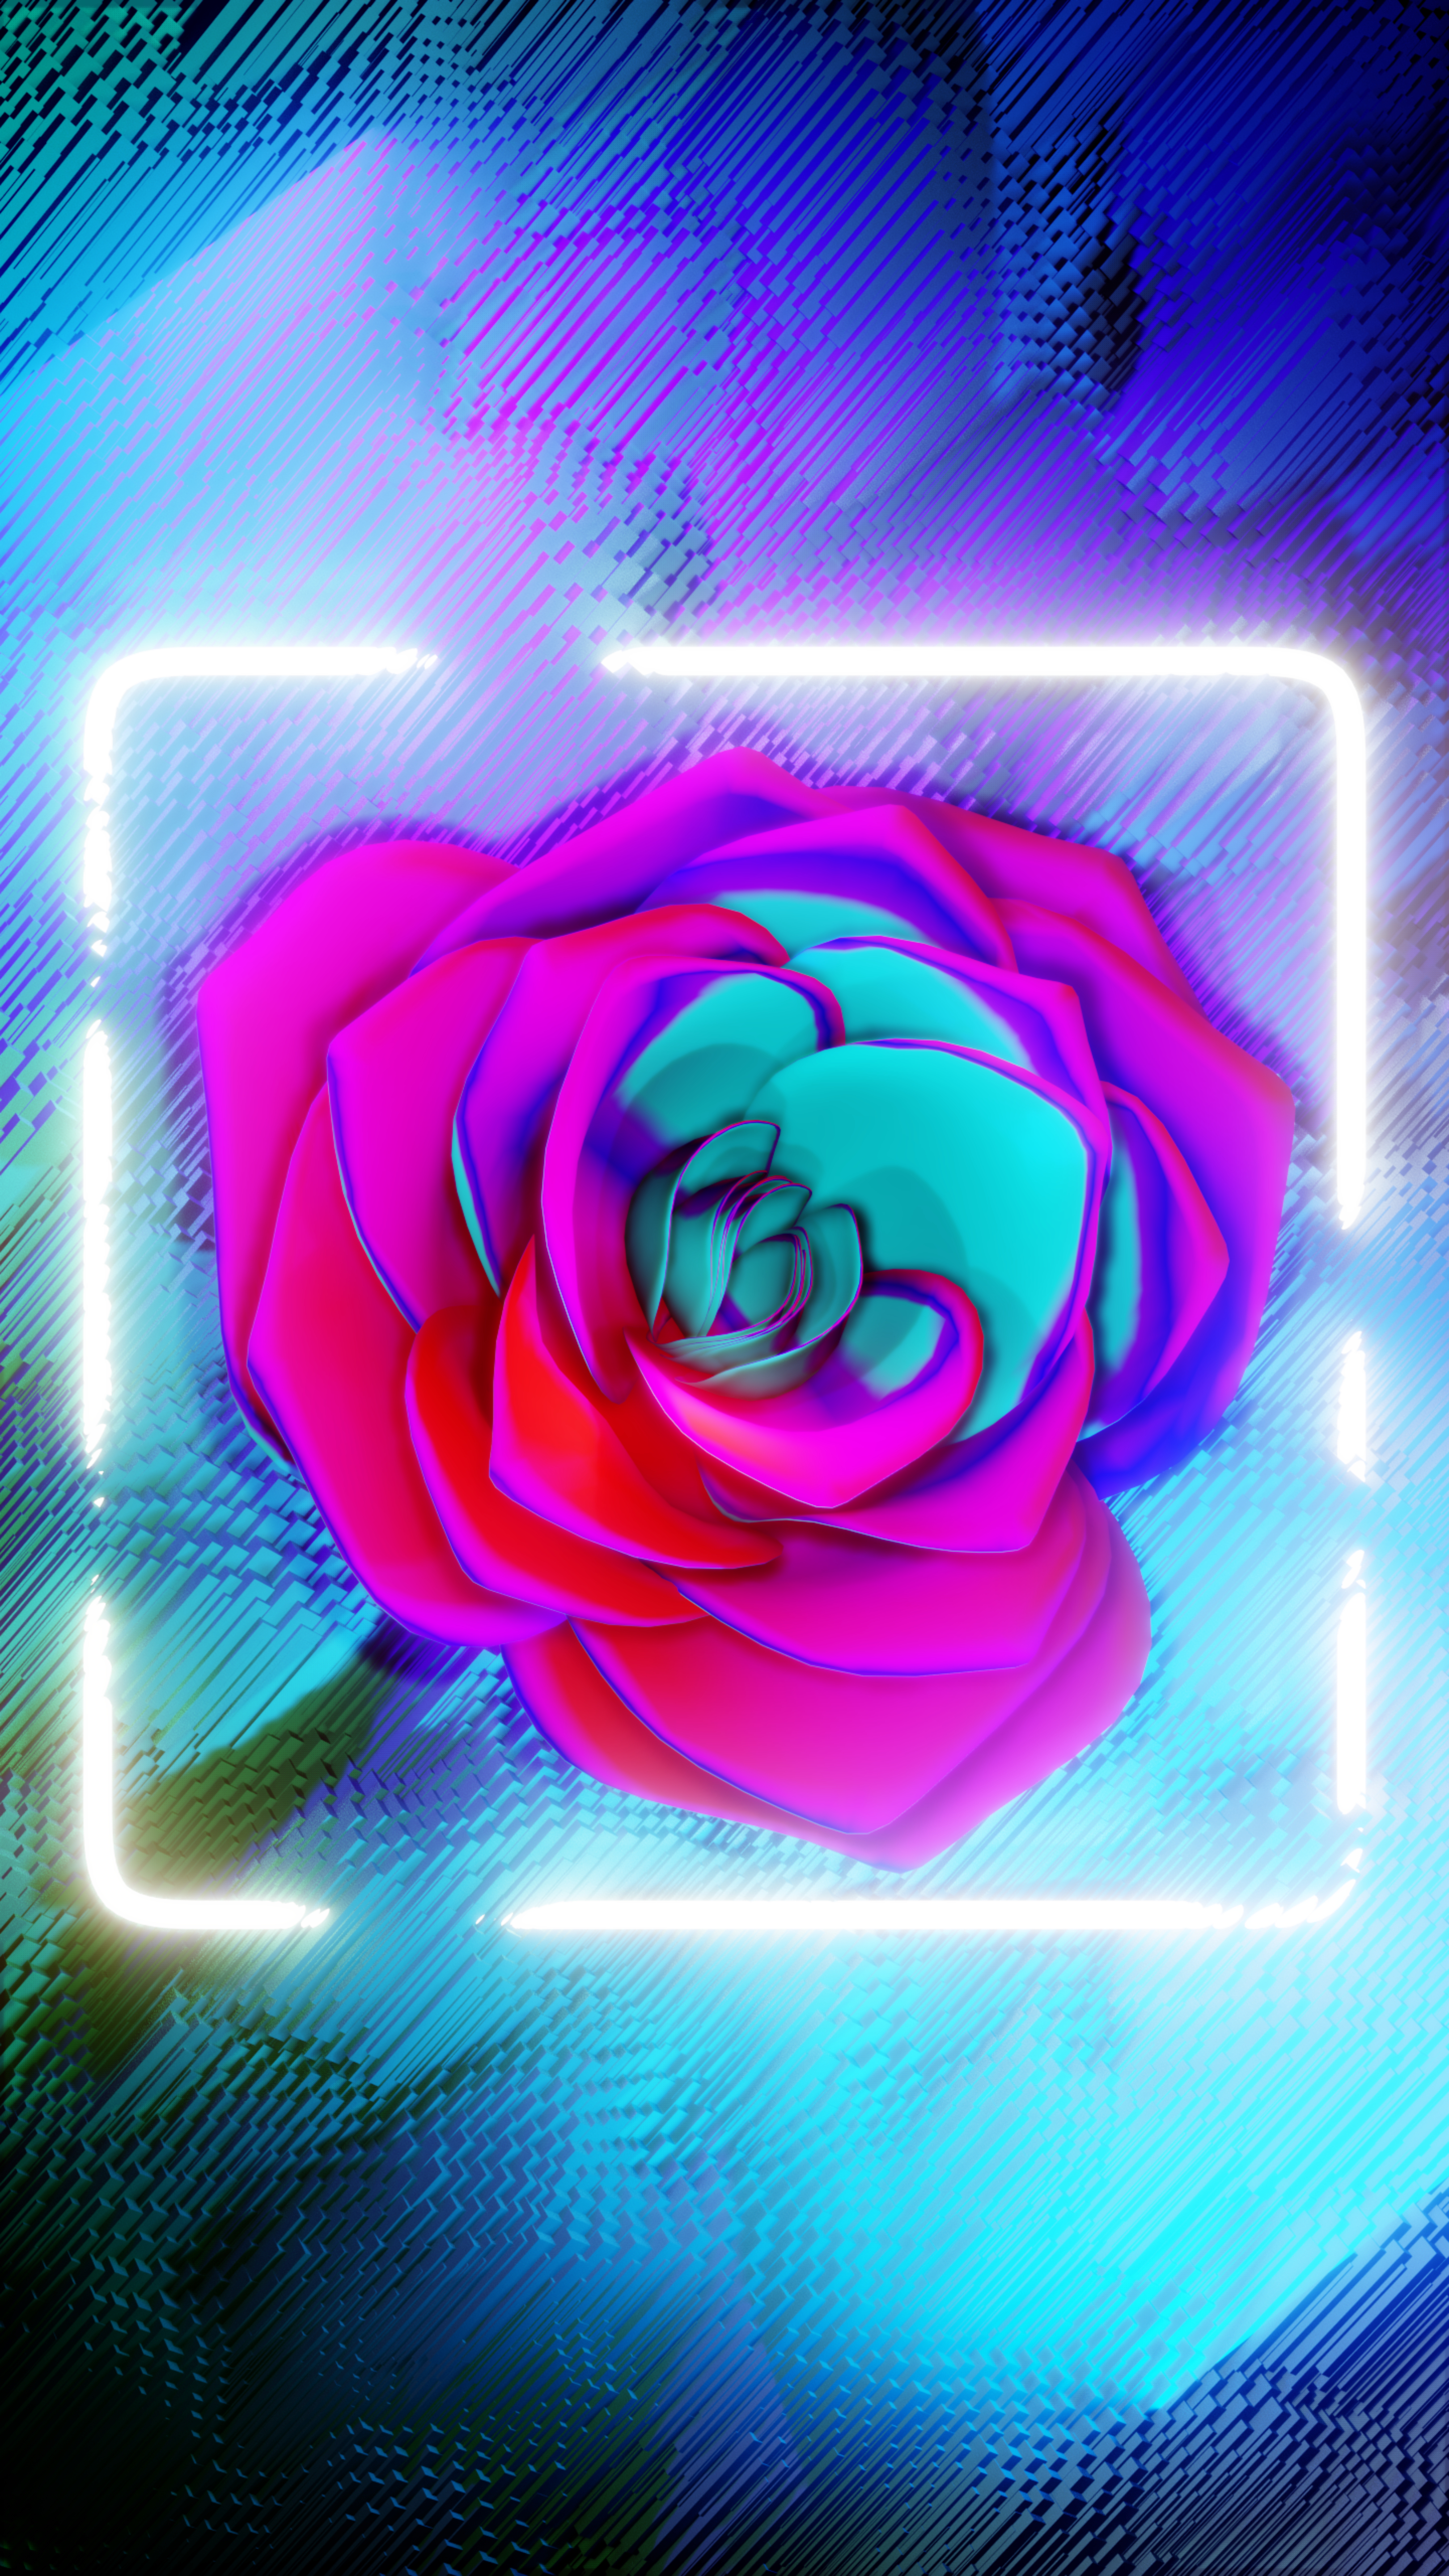 Mobile wallpaper Frame Flower Glow Bright Neon 3D 120552 download  the picture for free